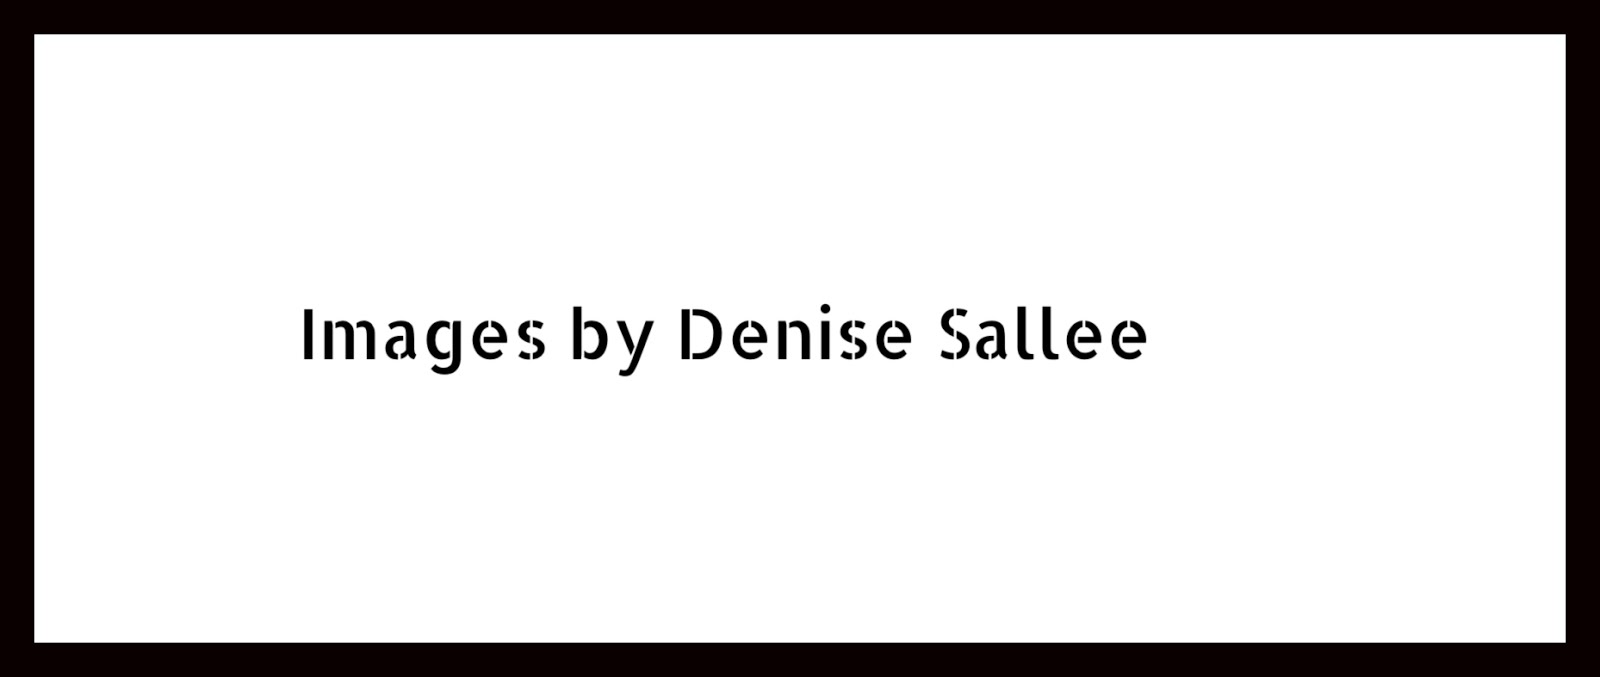 Images by Denise Sallee